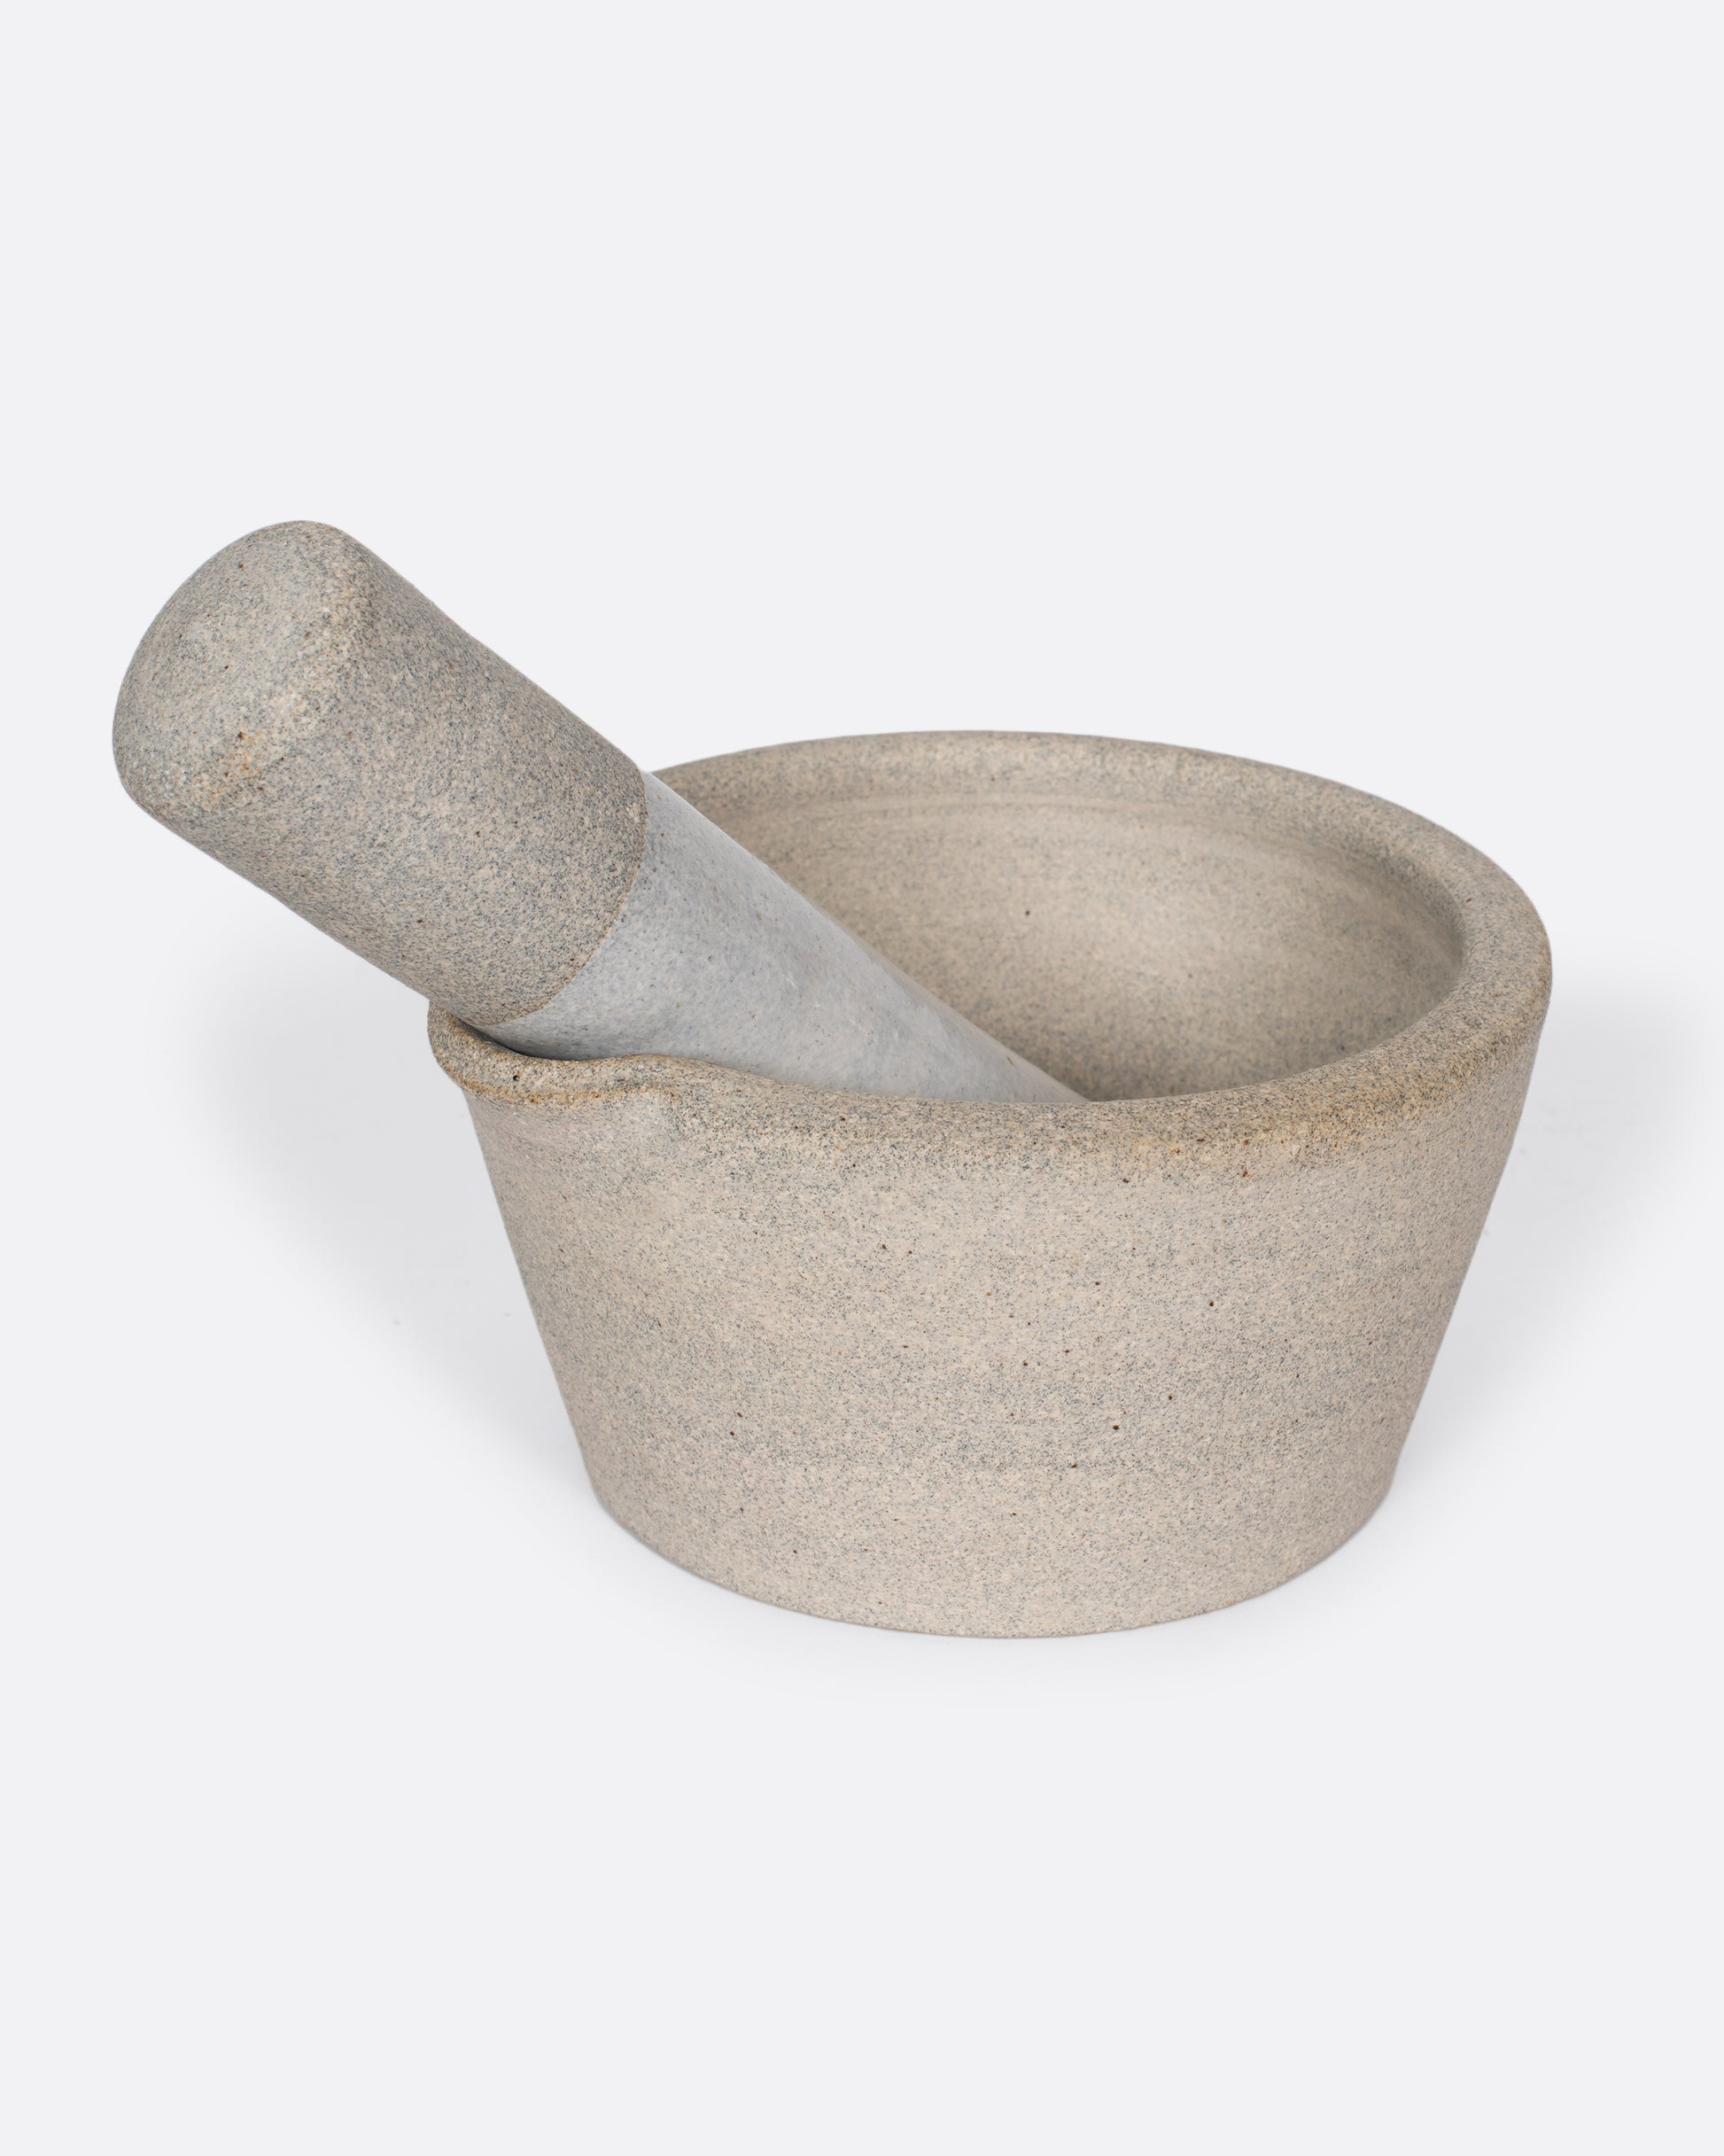 Broad-rimmed and heavy, this mortar and pestle is both beautiful and highly functional, easy to clean and stain-resistant.